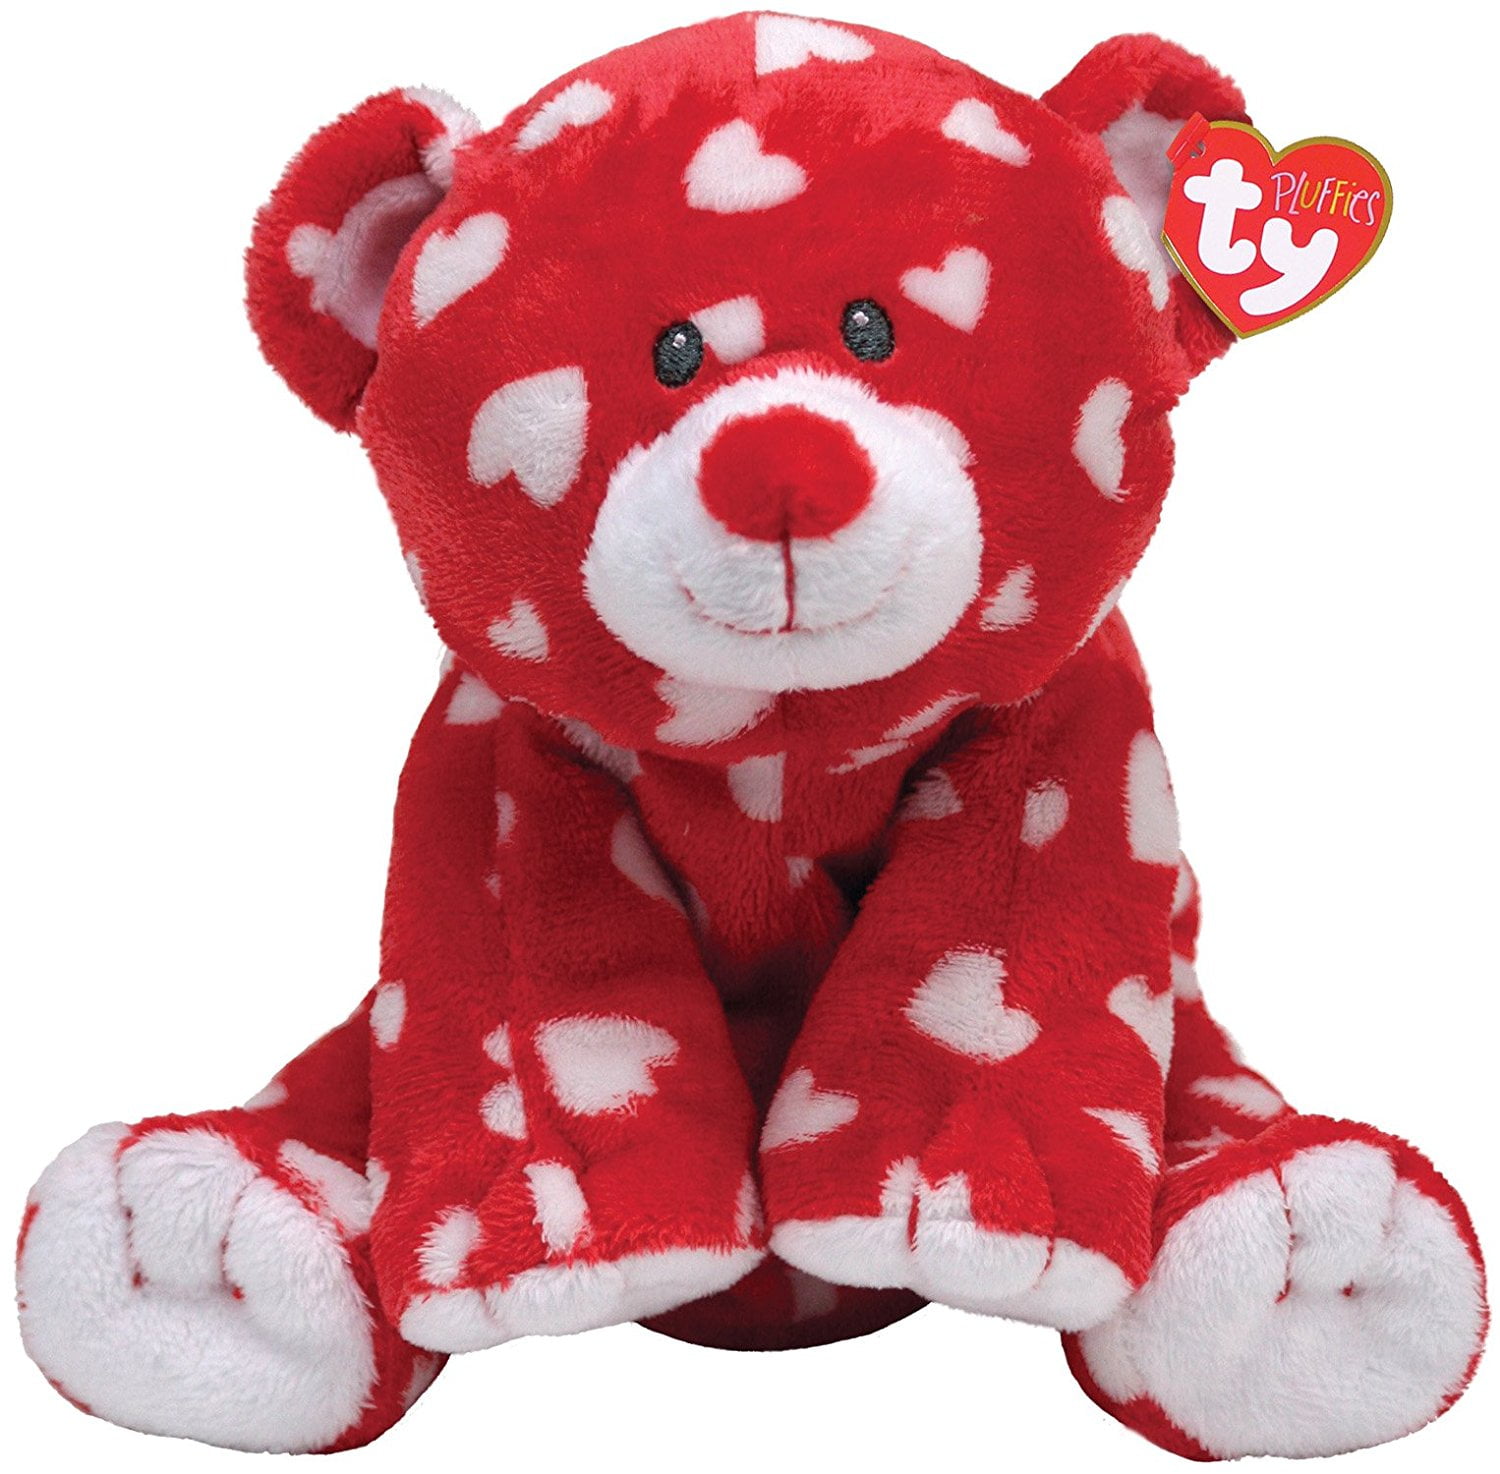 Ty Pluffies DREAMLY Dreamsly Teddy Bear Plush Set Red White Hearts 2008 Tylux for sale online 